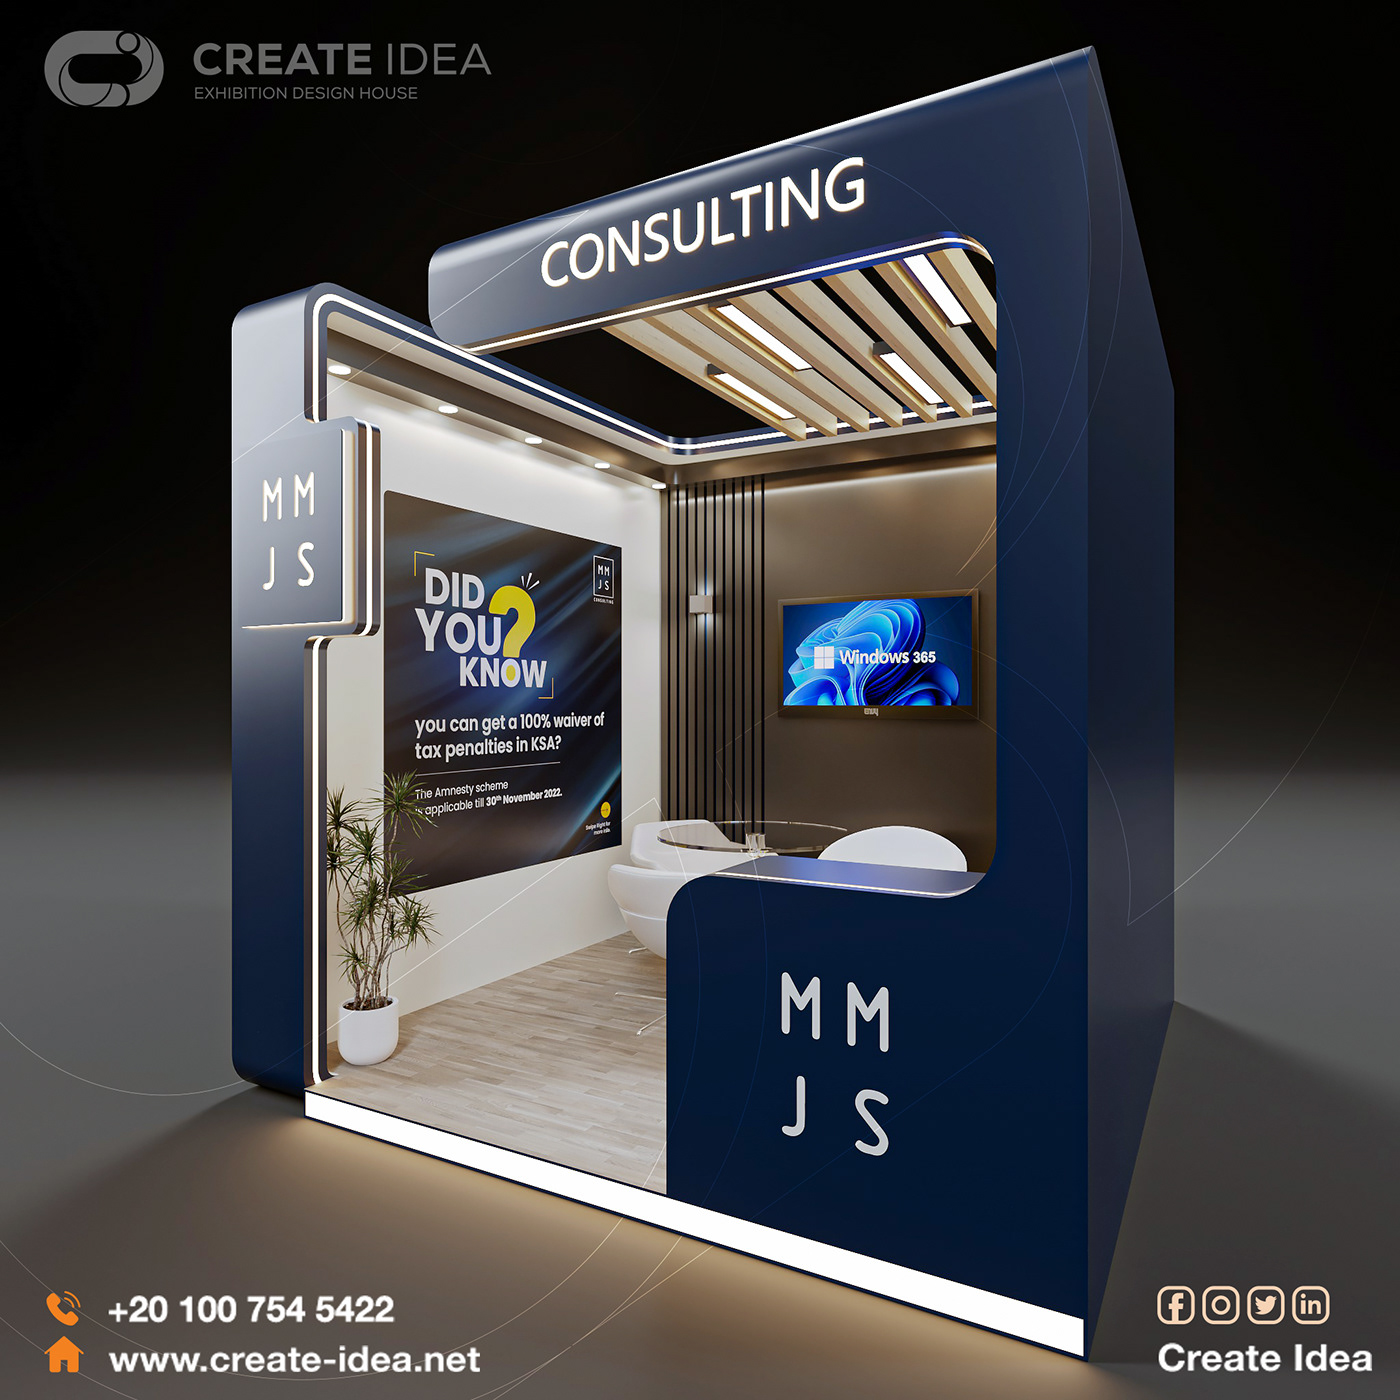 3D booth booth design design Display Exhibition  Exhibition Design  exhibition stand expo Stand